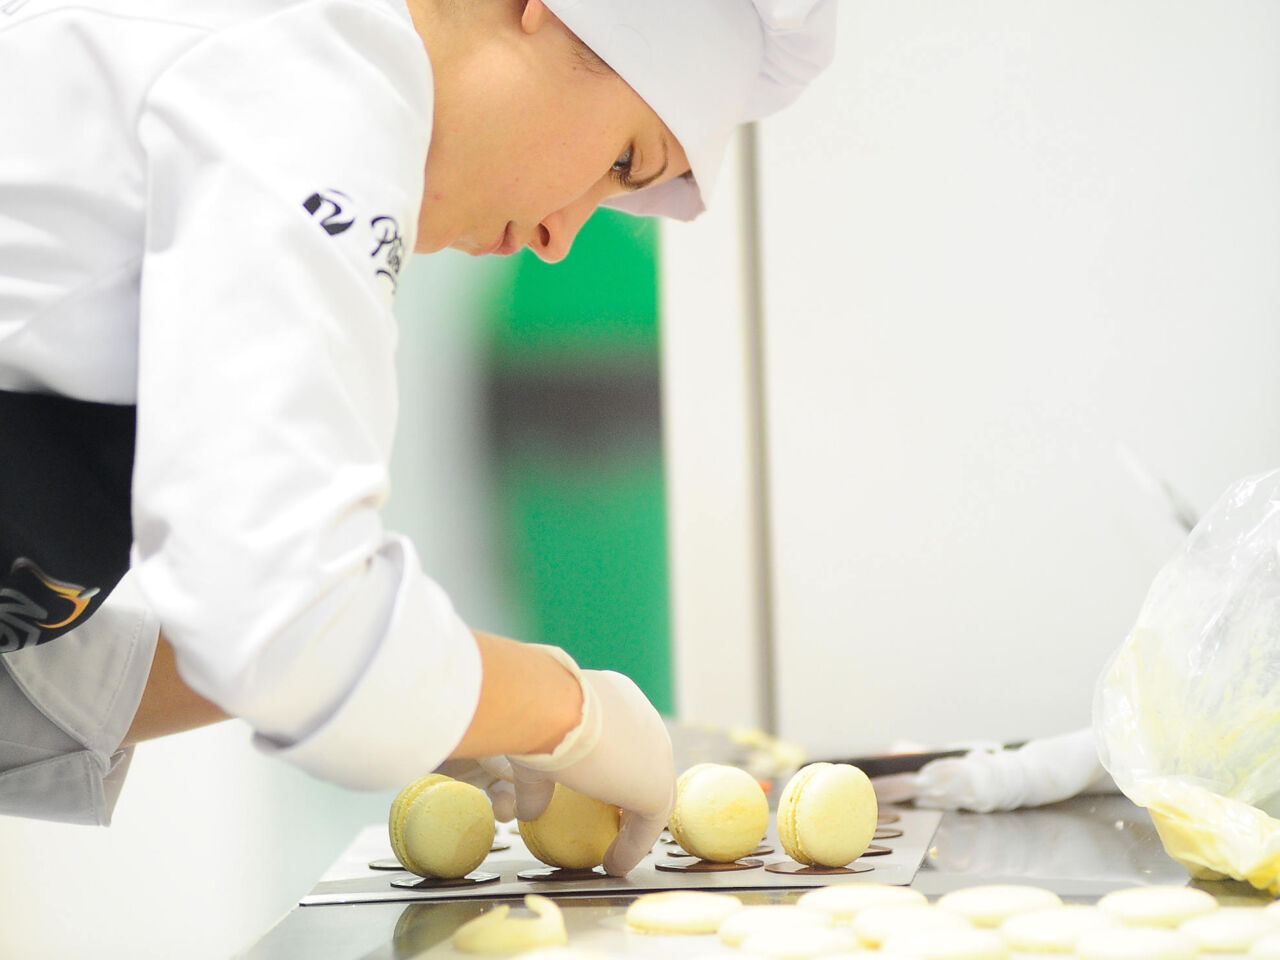 #WhatsYourSkill: “Pastry is art and science”